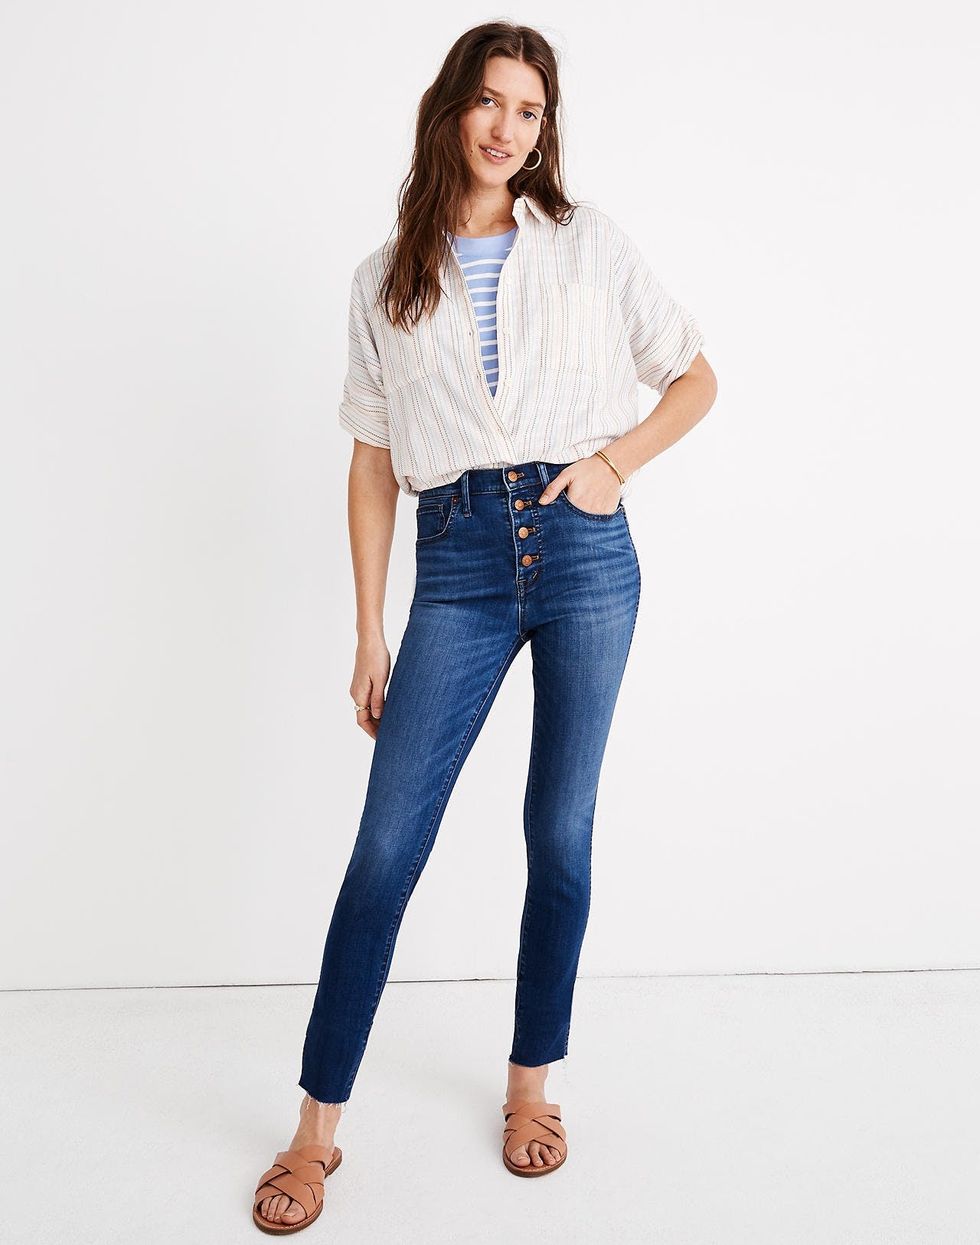 19 Denim Buys That Were Practically Made for Long-Legged Ladies - Brit + Co